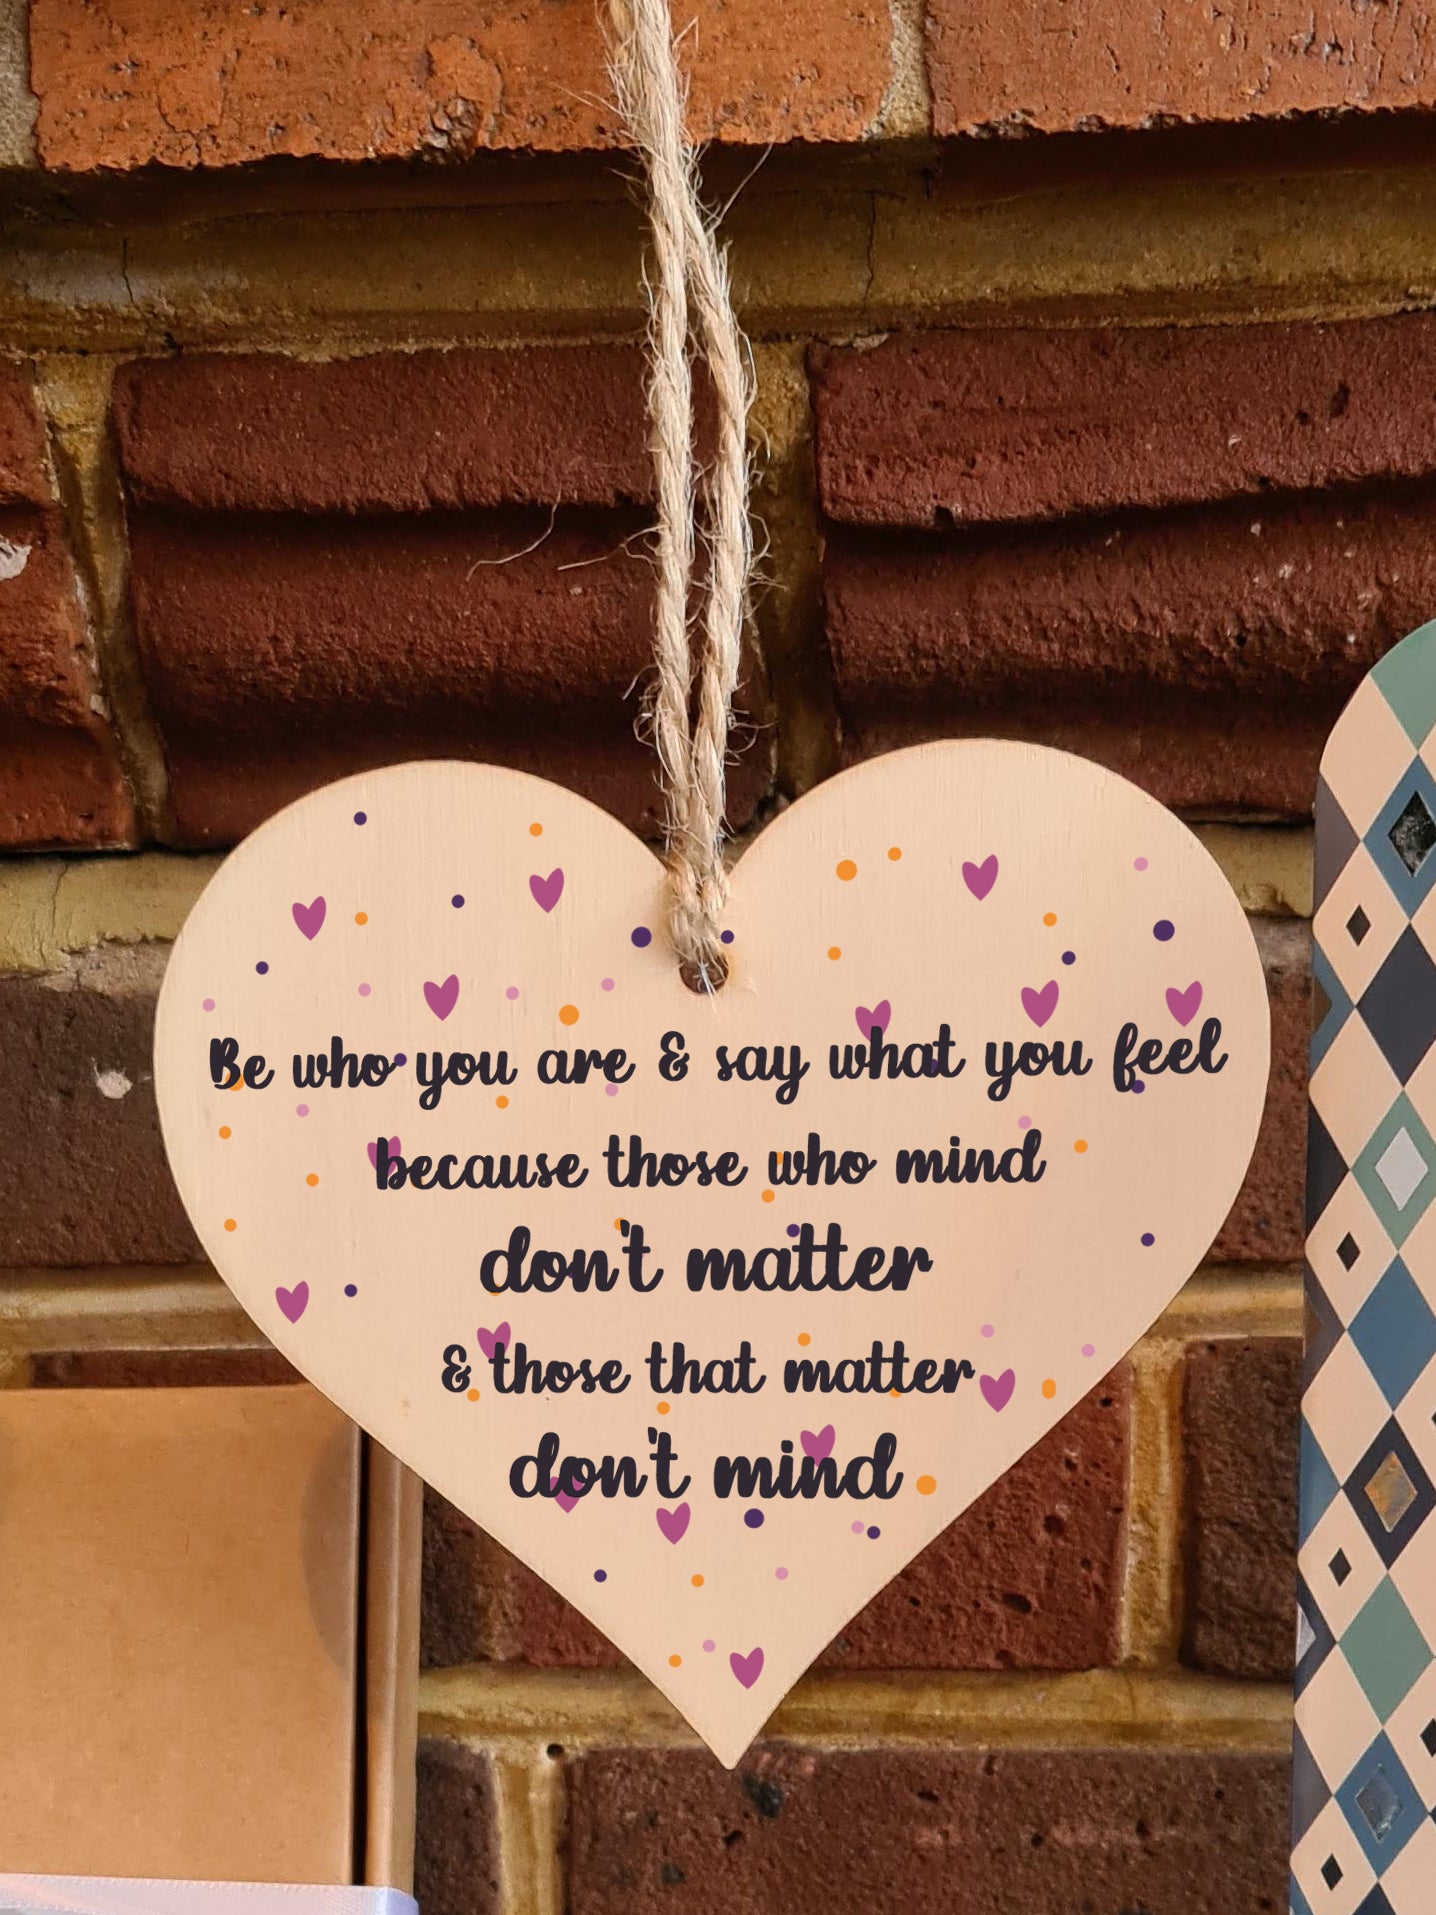 Handmade Wooden Hanging Heart Plaque Gift Be Who You Are Feel Inspirational Wall Hanger Card Alternative Motivational Present